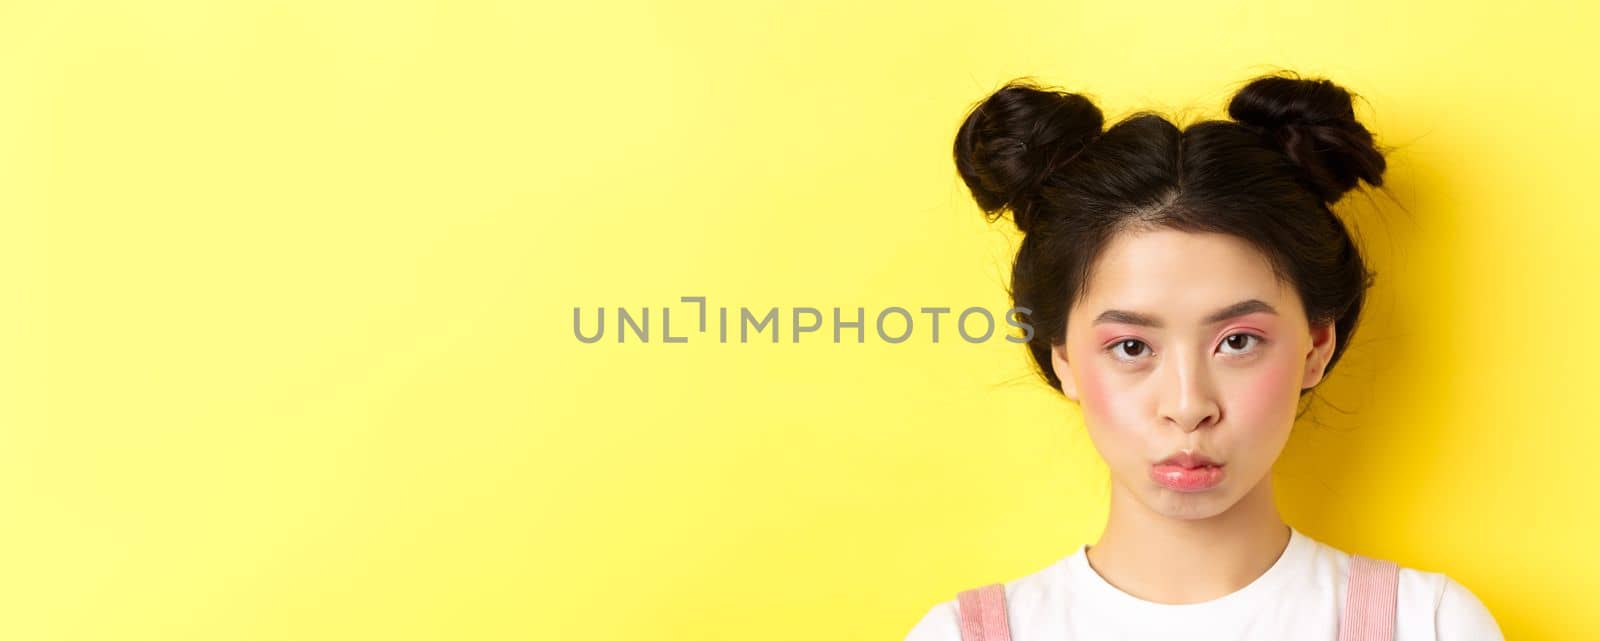 Close up portrait of moody asian girl pouting and looking upset at camera, standing wiht glamour makeup and hairbuns on yellow background.